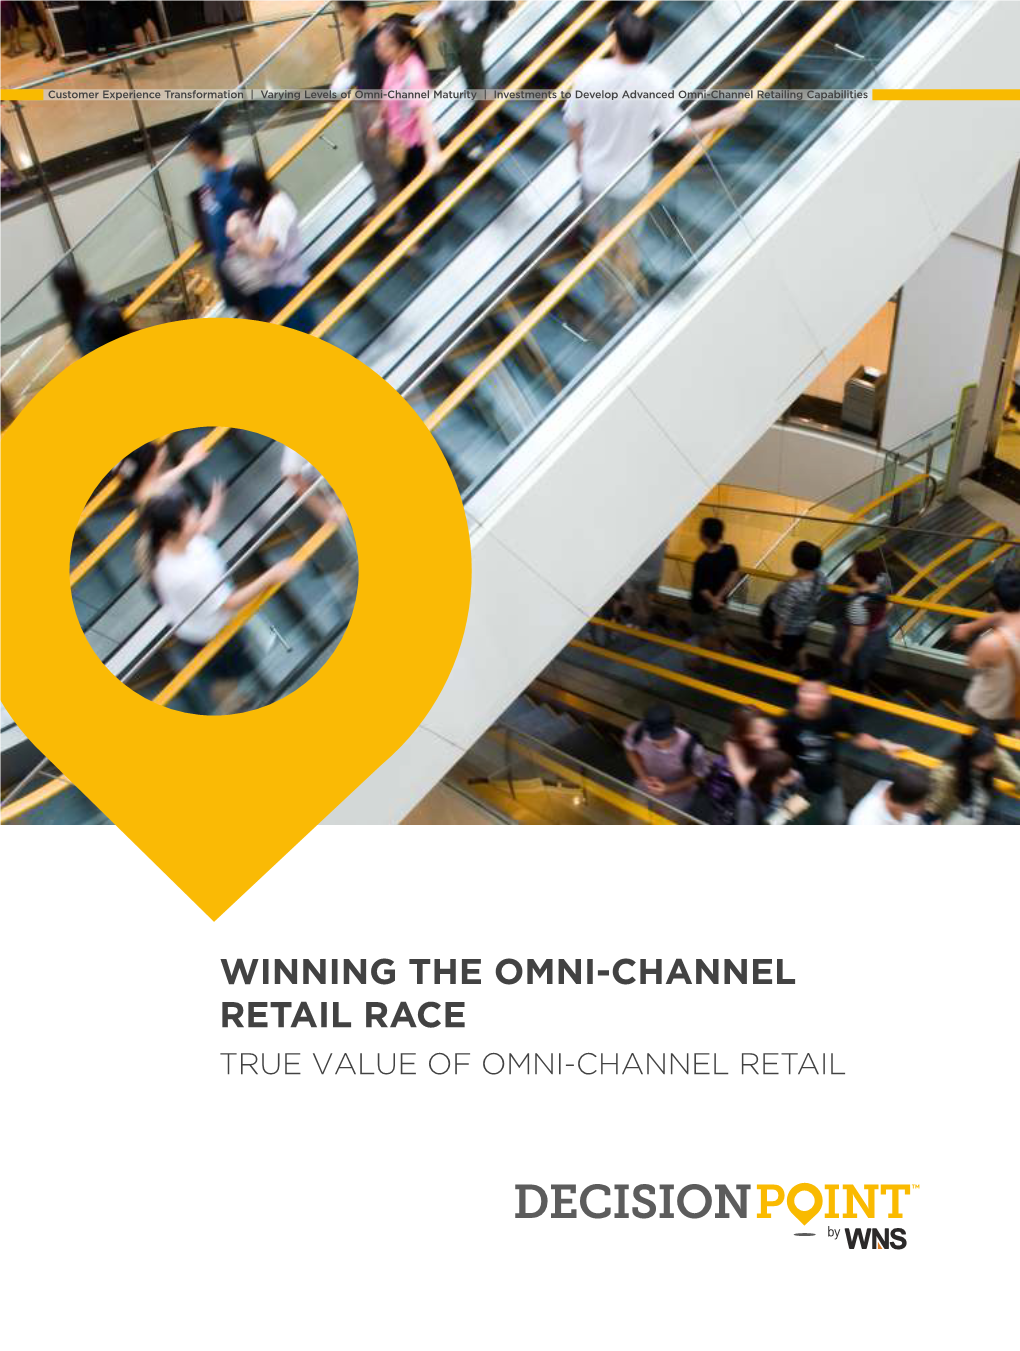 Winning Omni-Channel Retail Race | WNS Decisionpoint